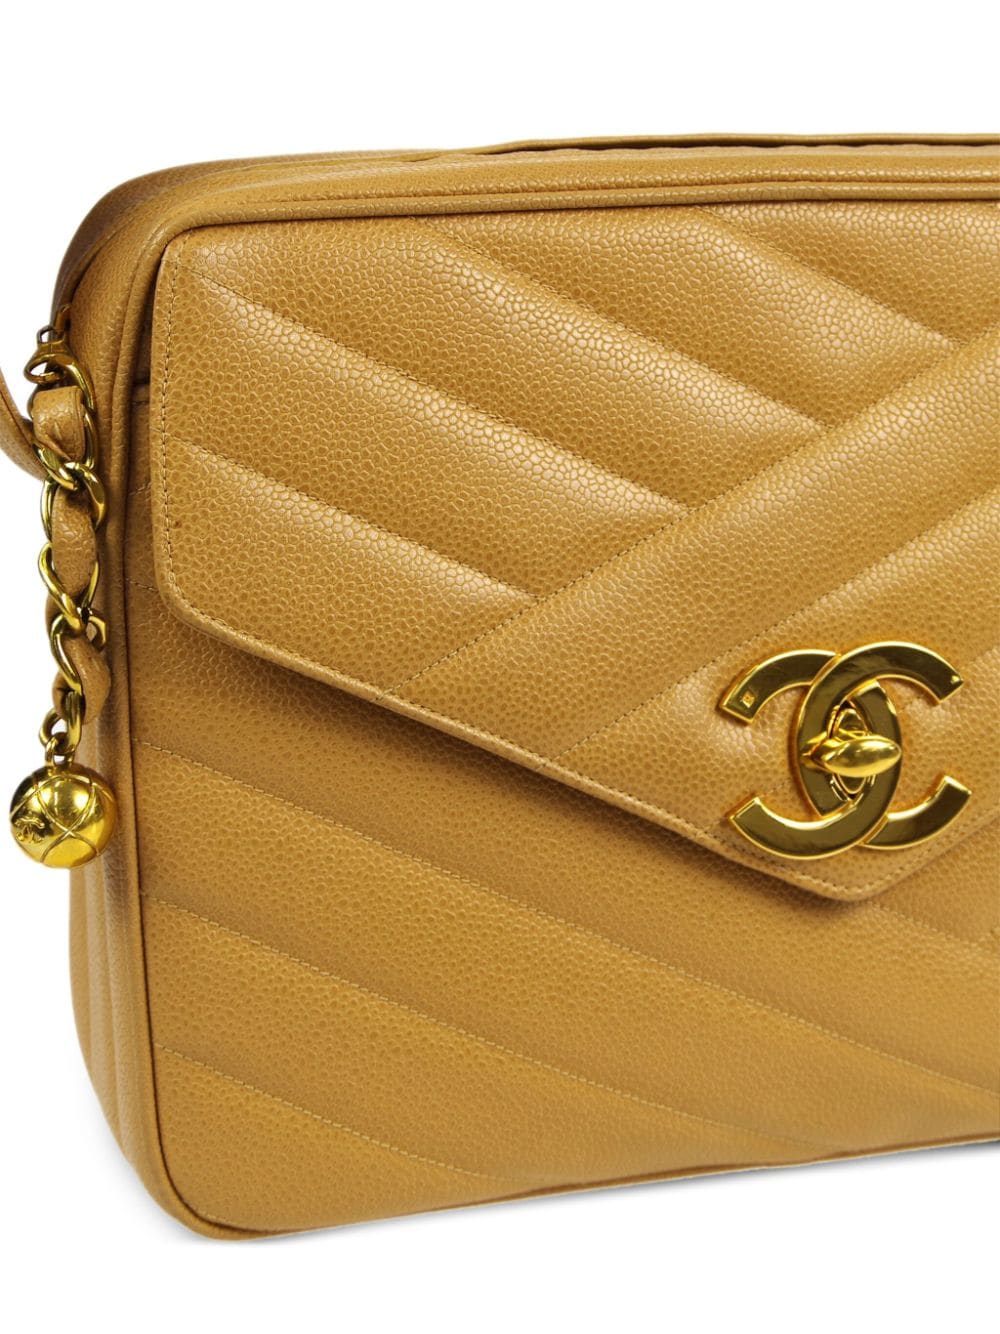 Pre-owned Chanel 1995 Bias Stitch Quilted Shoulder Bag In Yellow